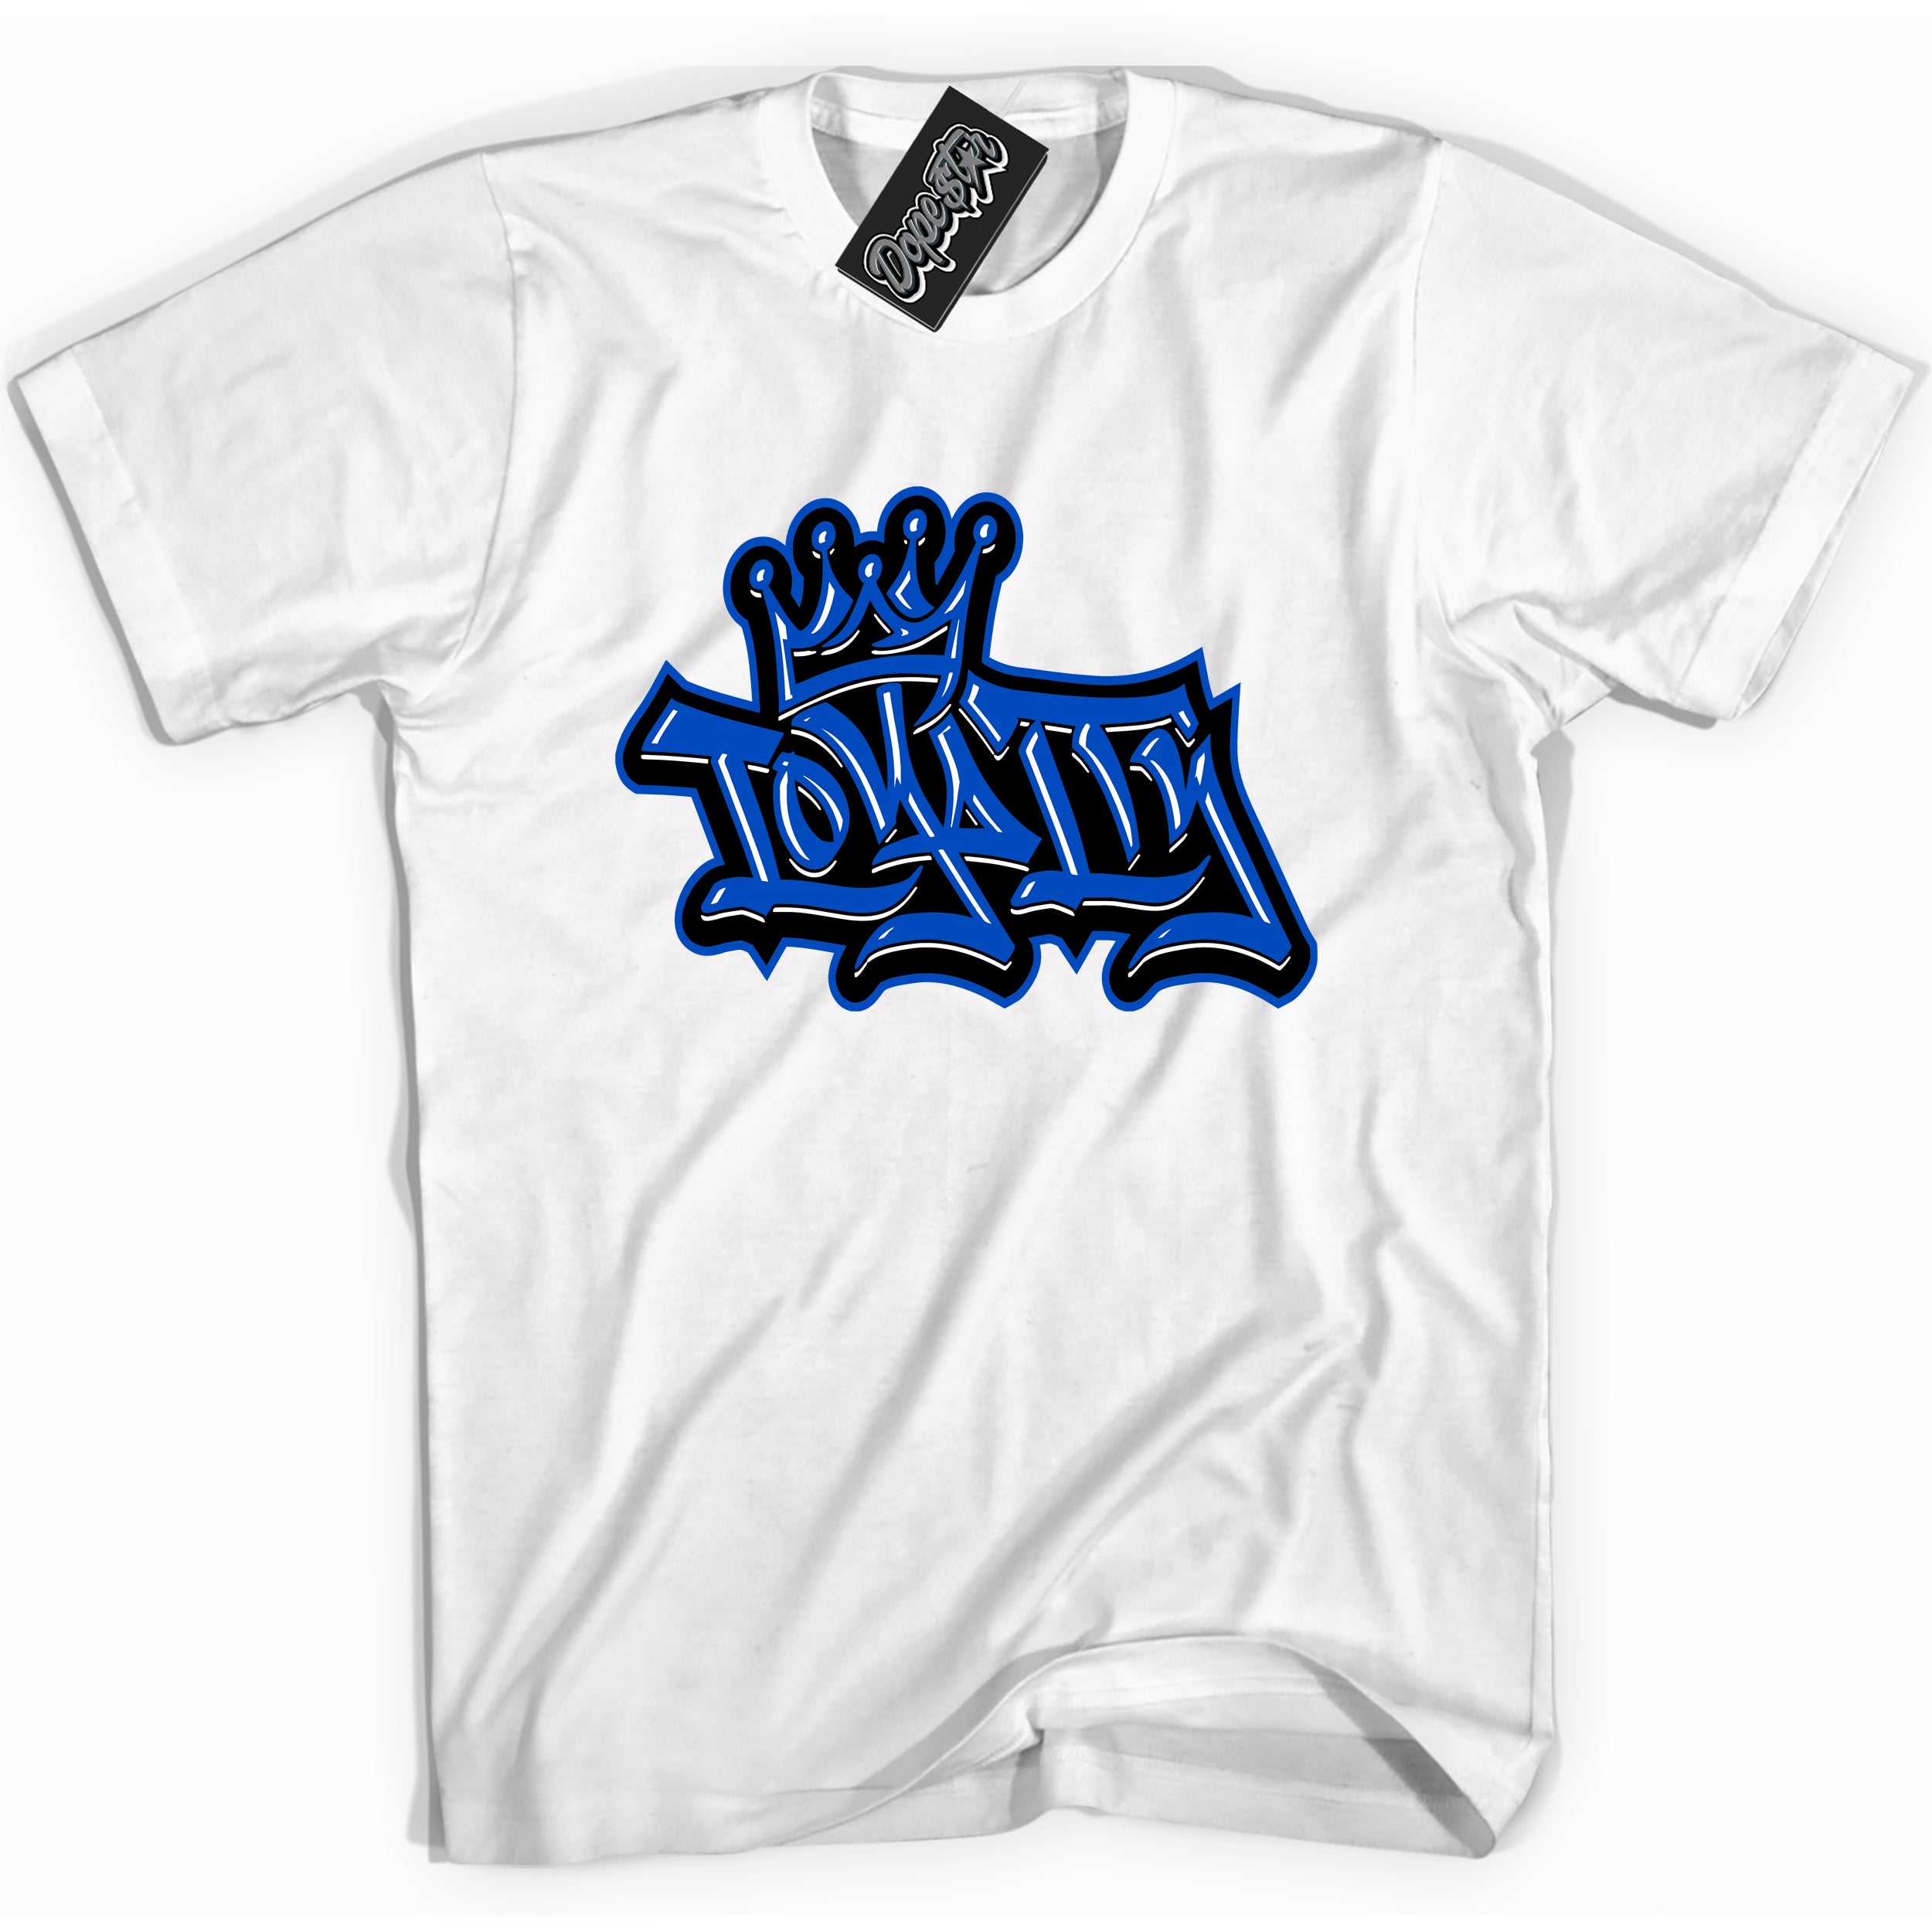 Cool White graphic tee with Loyalty Crown print, that perfectly matches OG Royal Reimagined 1s sneakers 